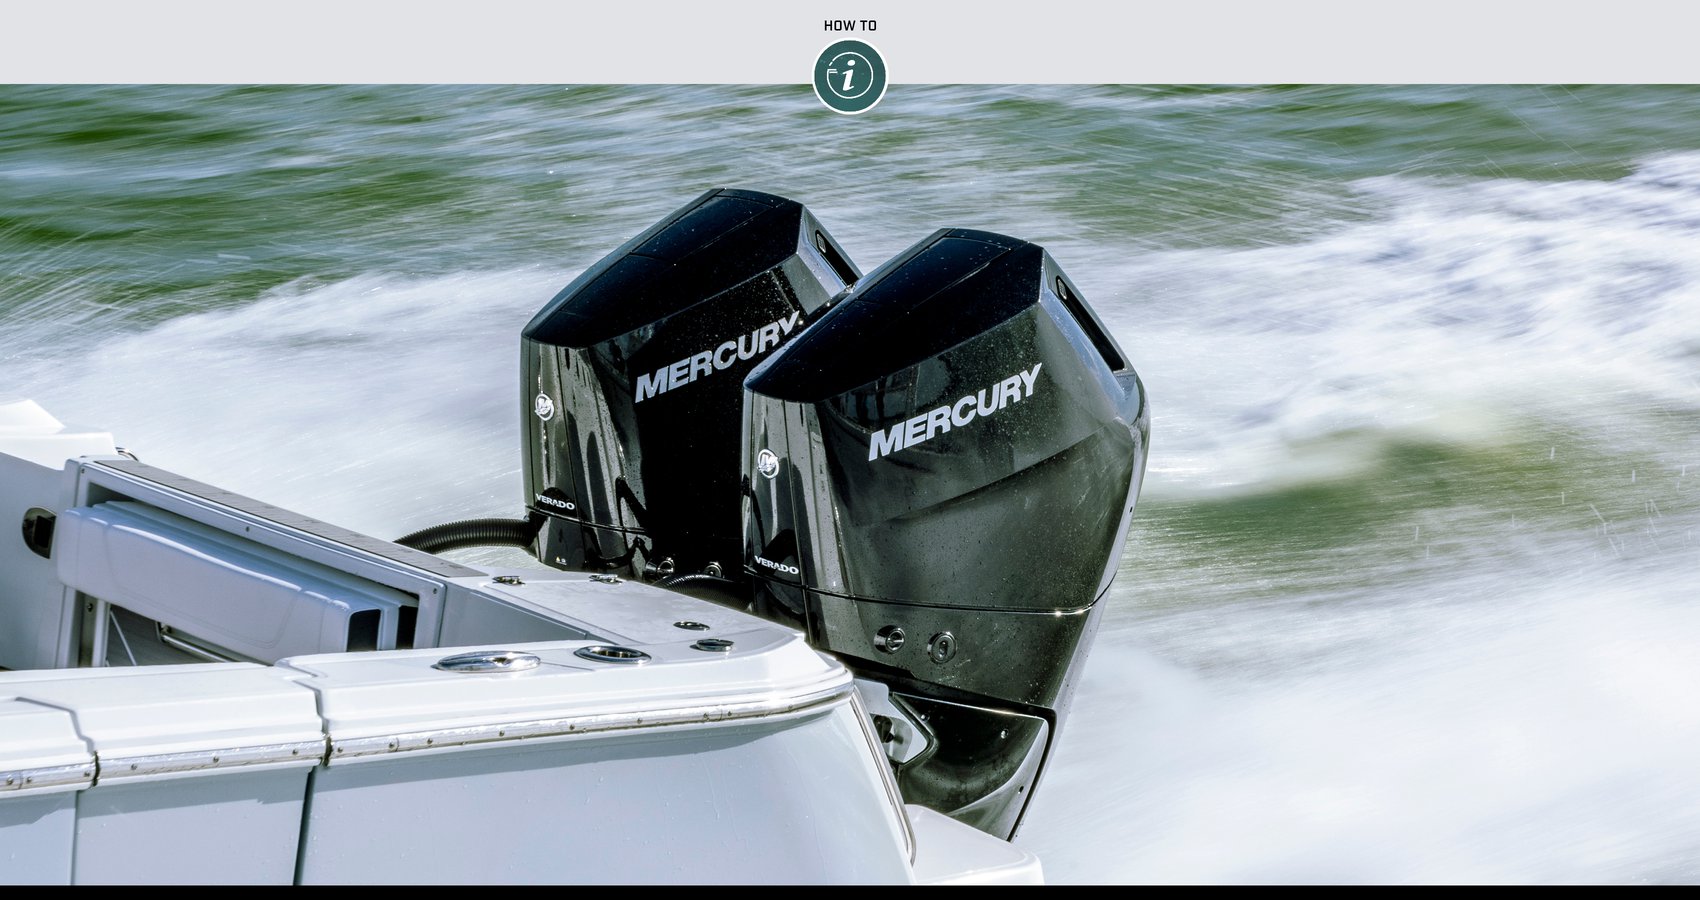 Outboard engines